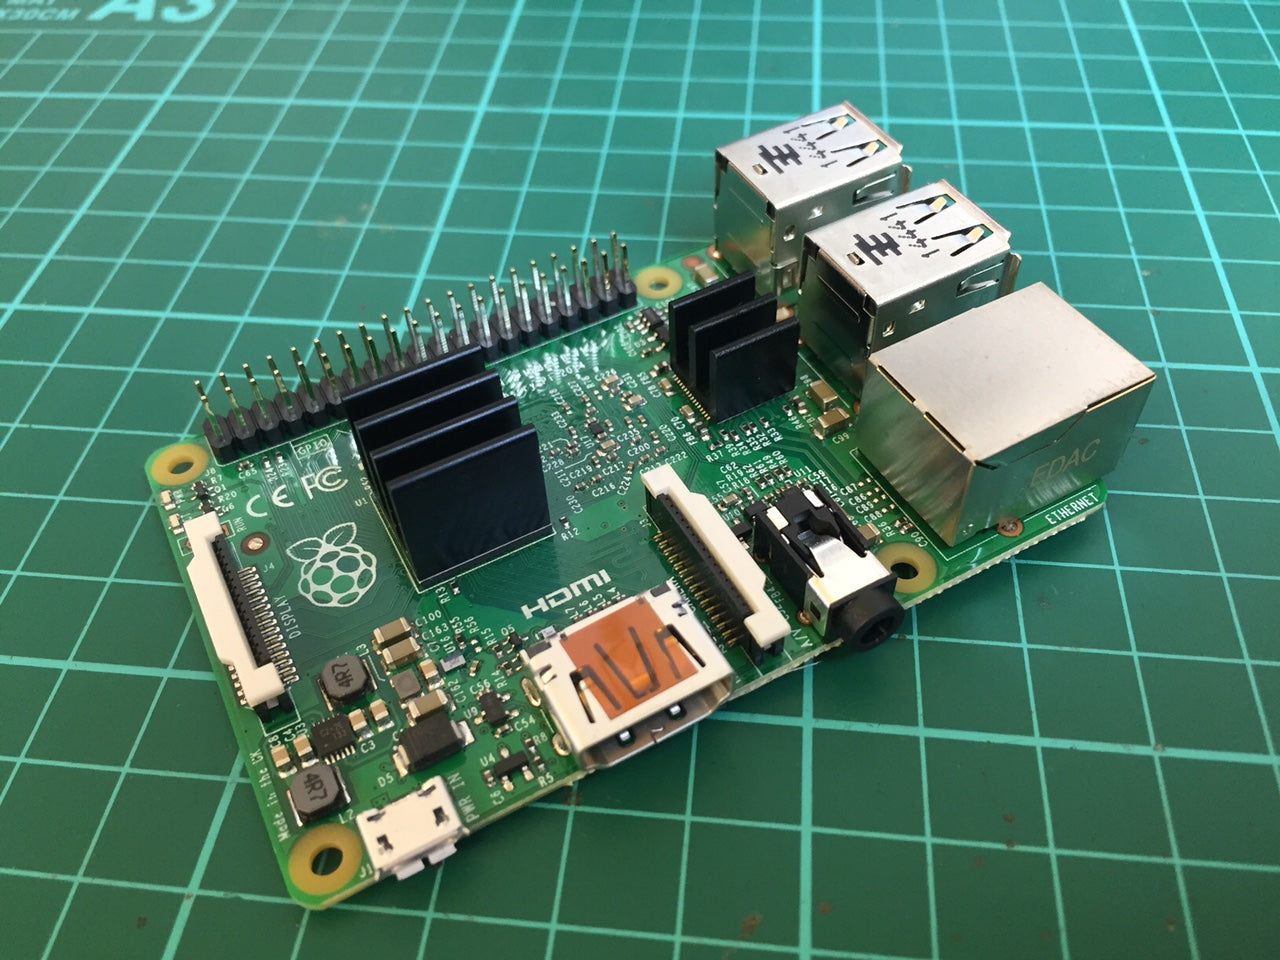 How to Install Heat Sinks on the Raspberry Pi